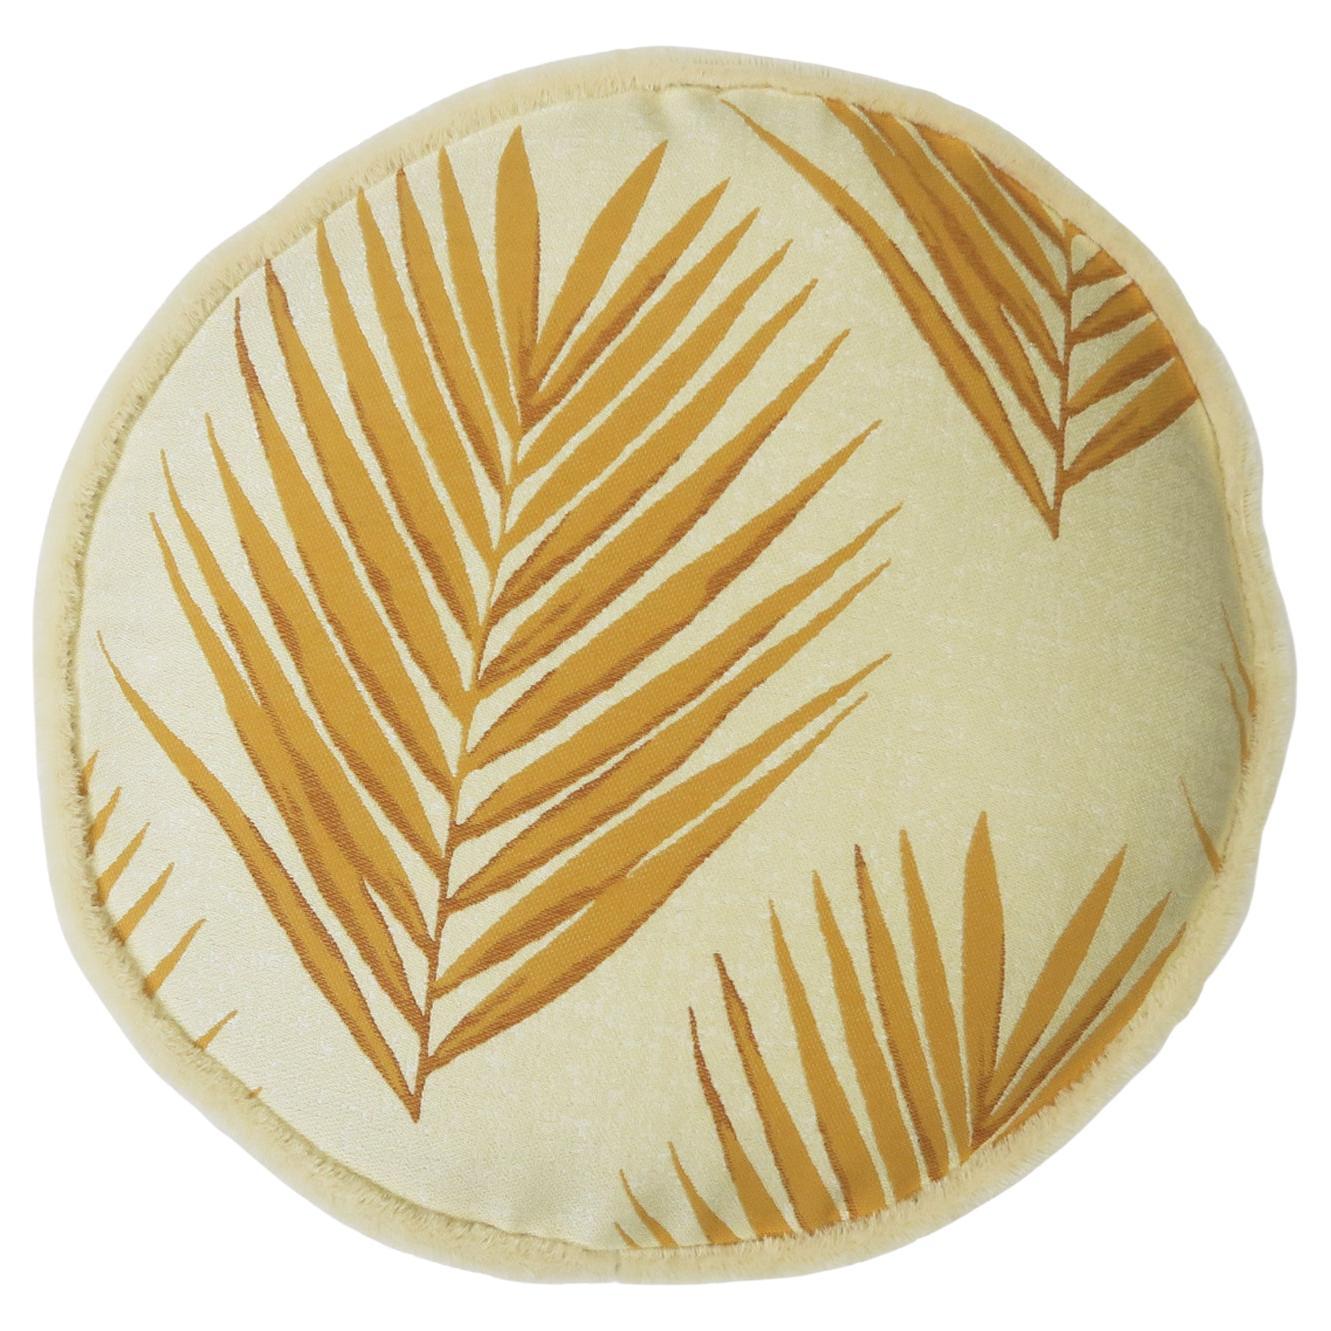 Modern Round Patterned Throw Pillow Yellow "Bamboo" by Evolution21